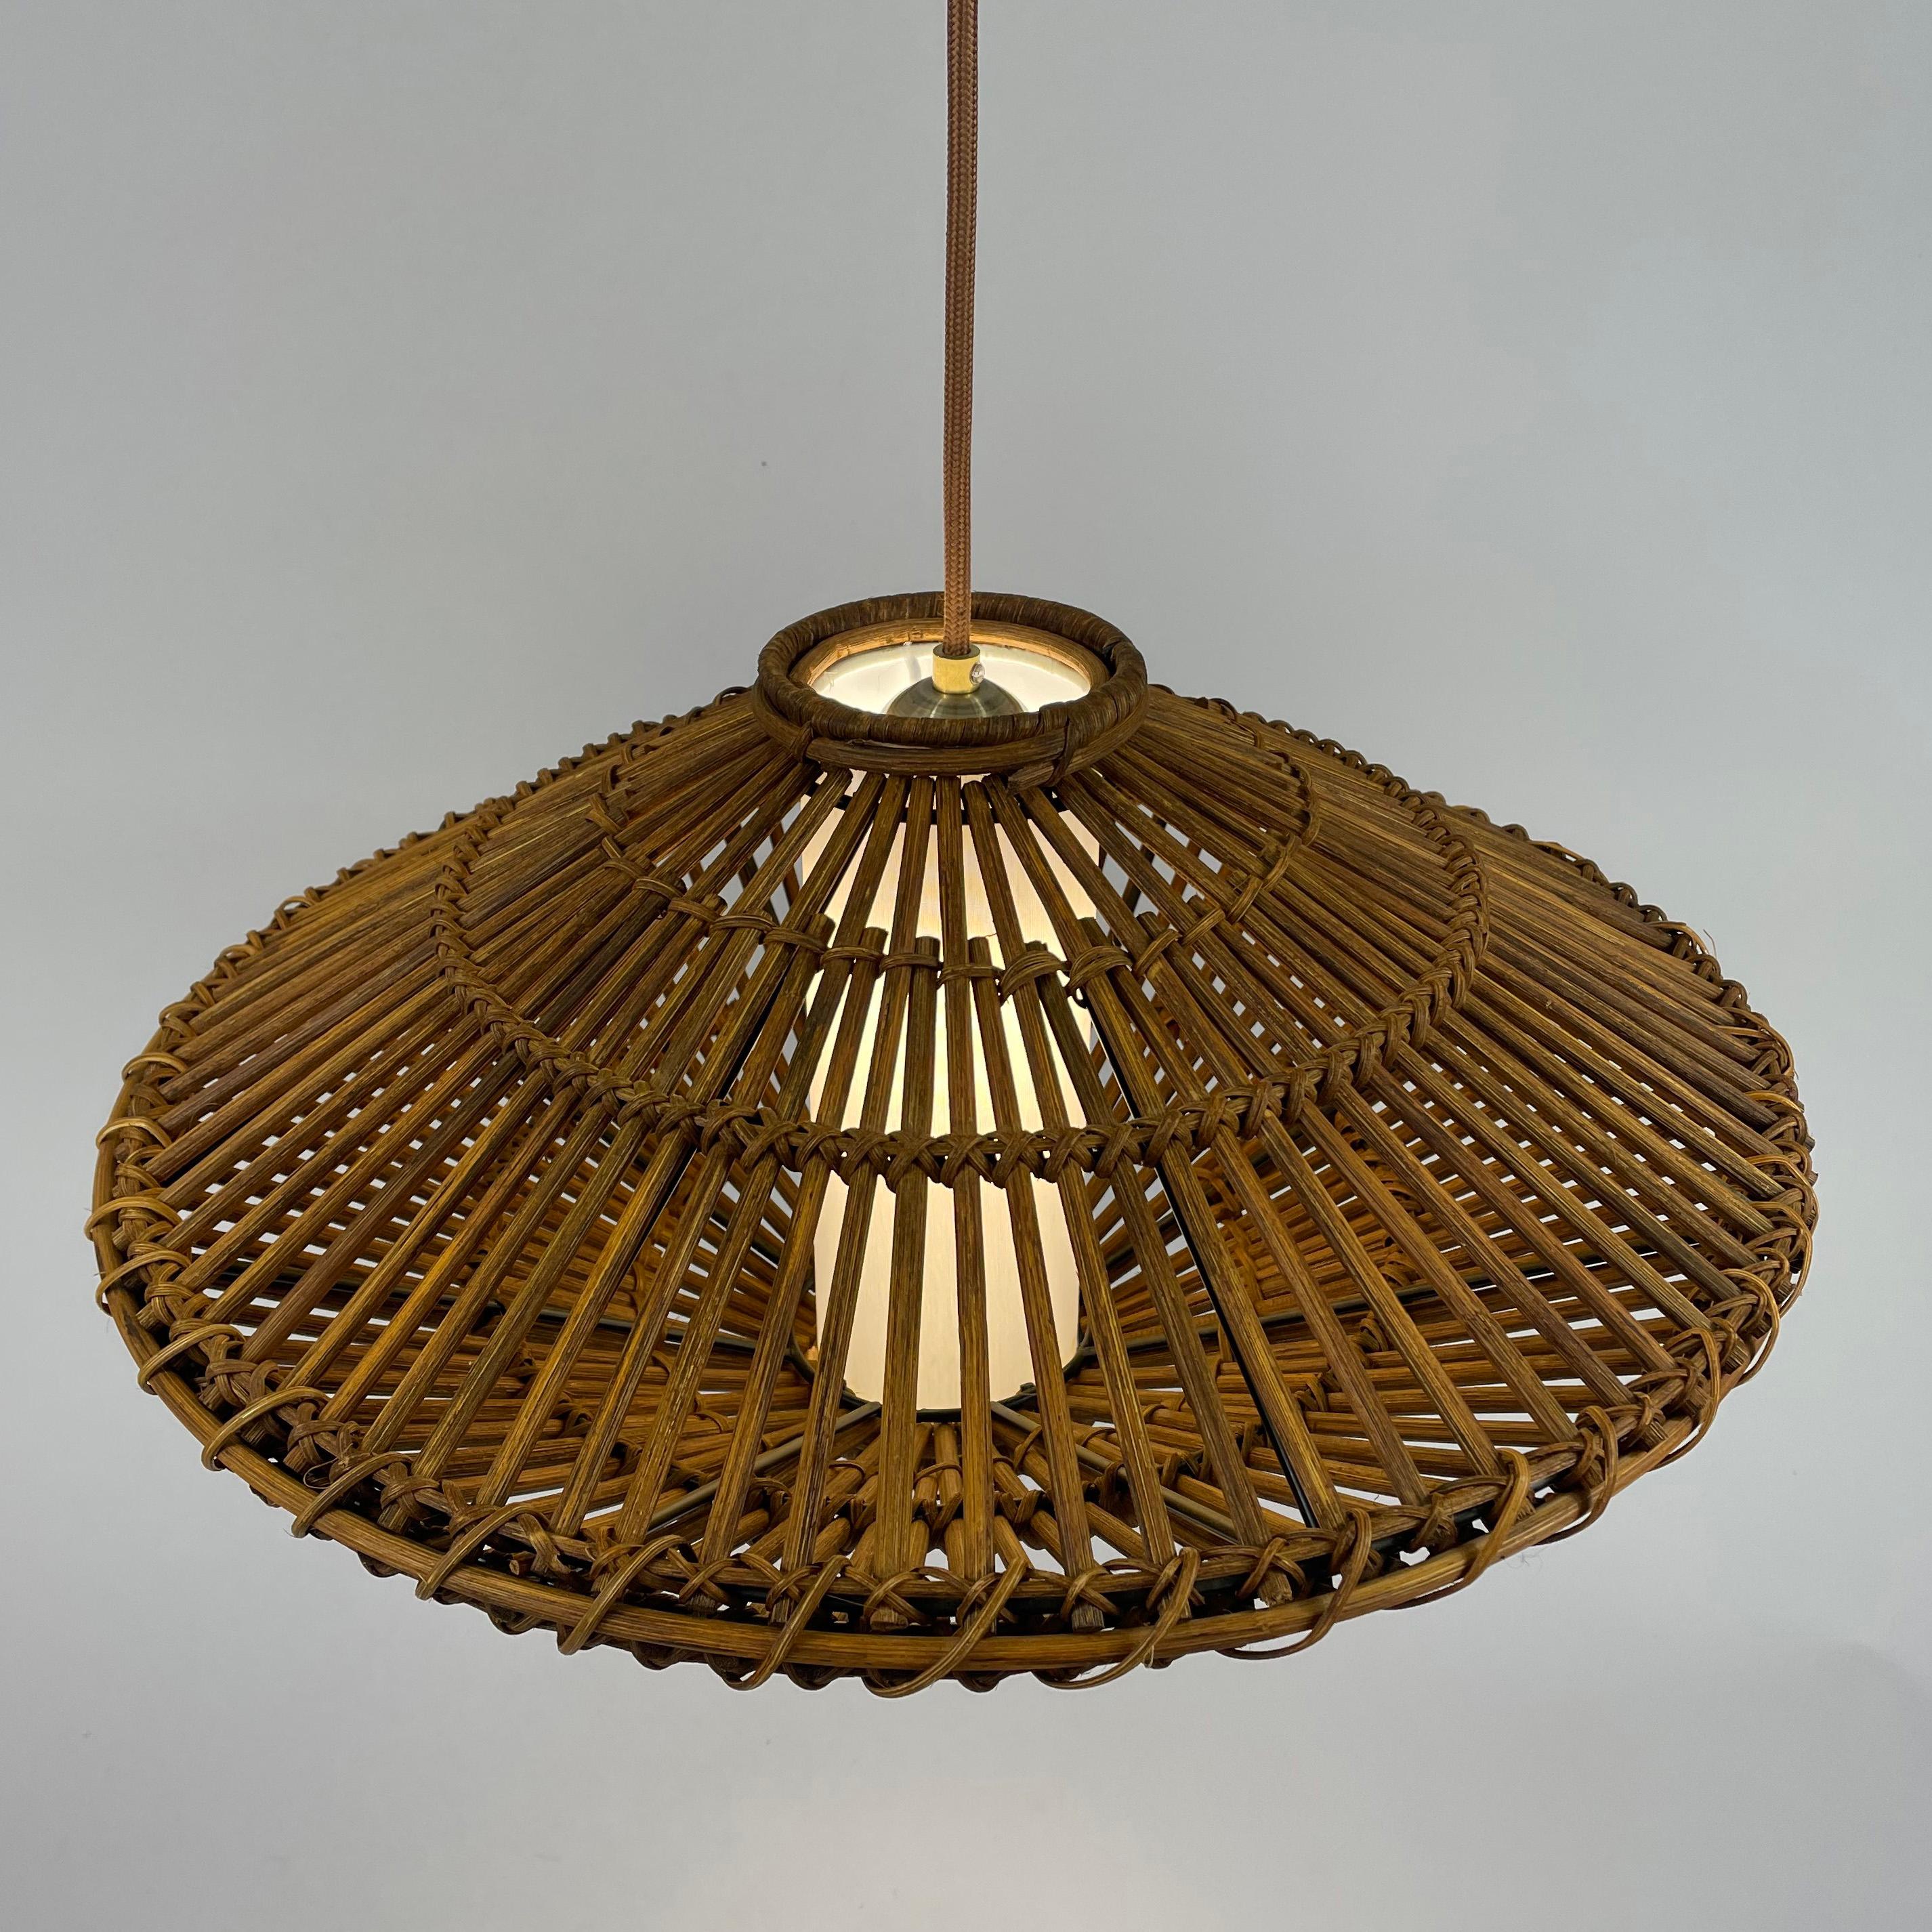 Midcentury French Rattan Wicker Pendant, 1960s For Sale 2